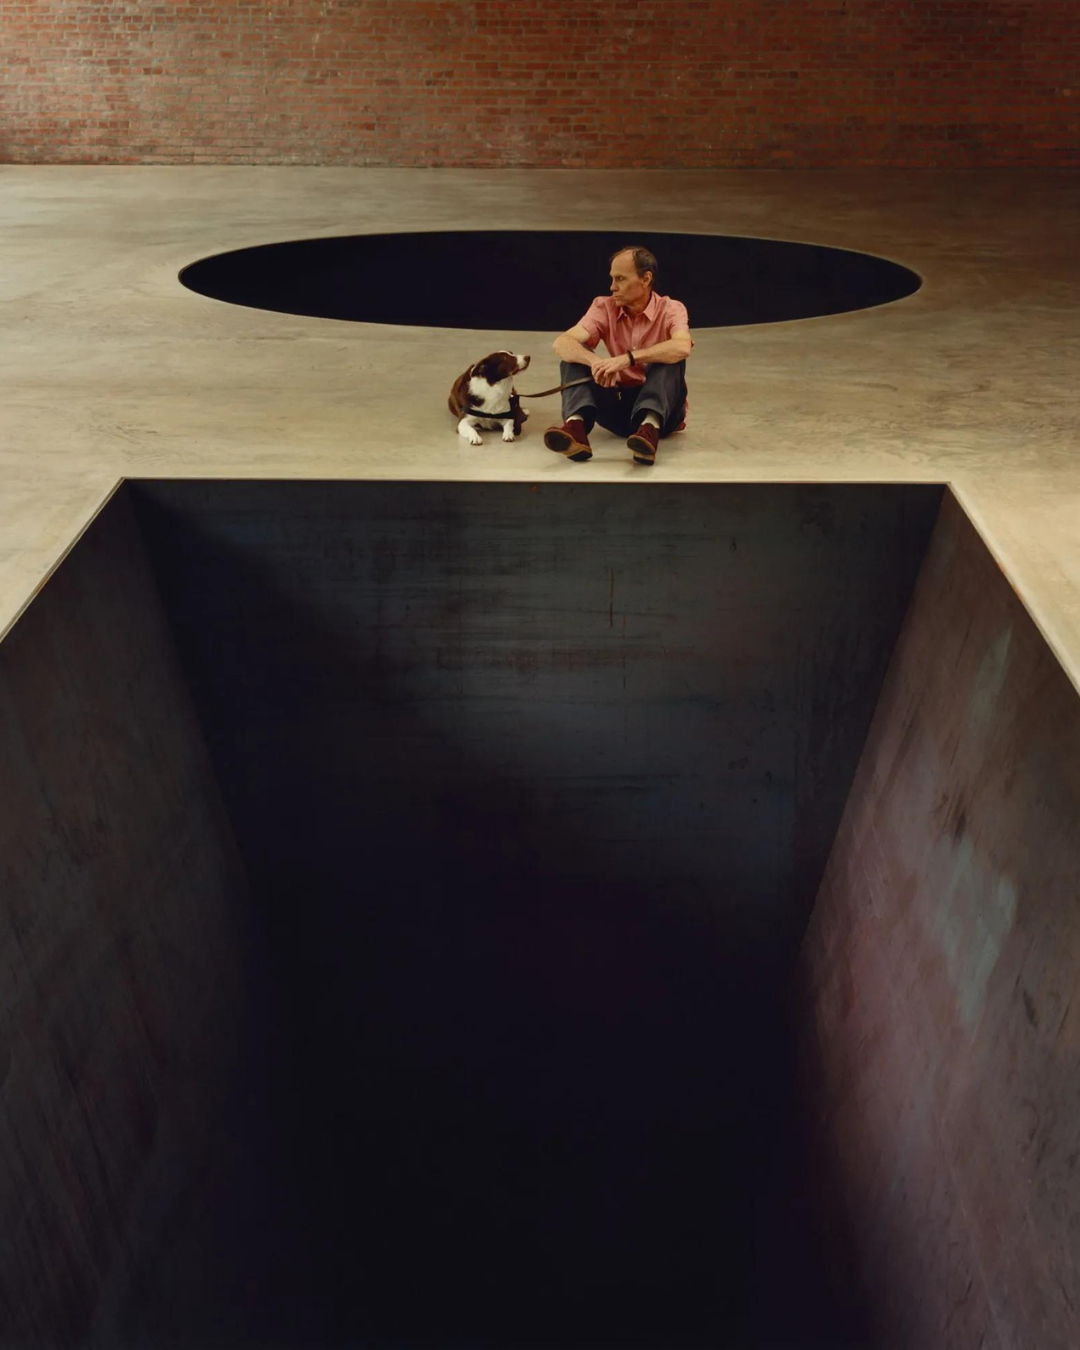 North, East, South, West | Michael Heizer | 1967/2002